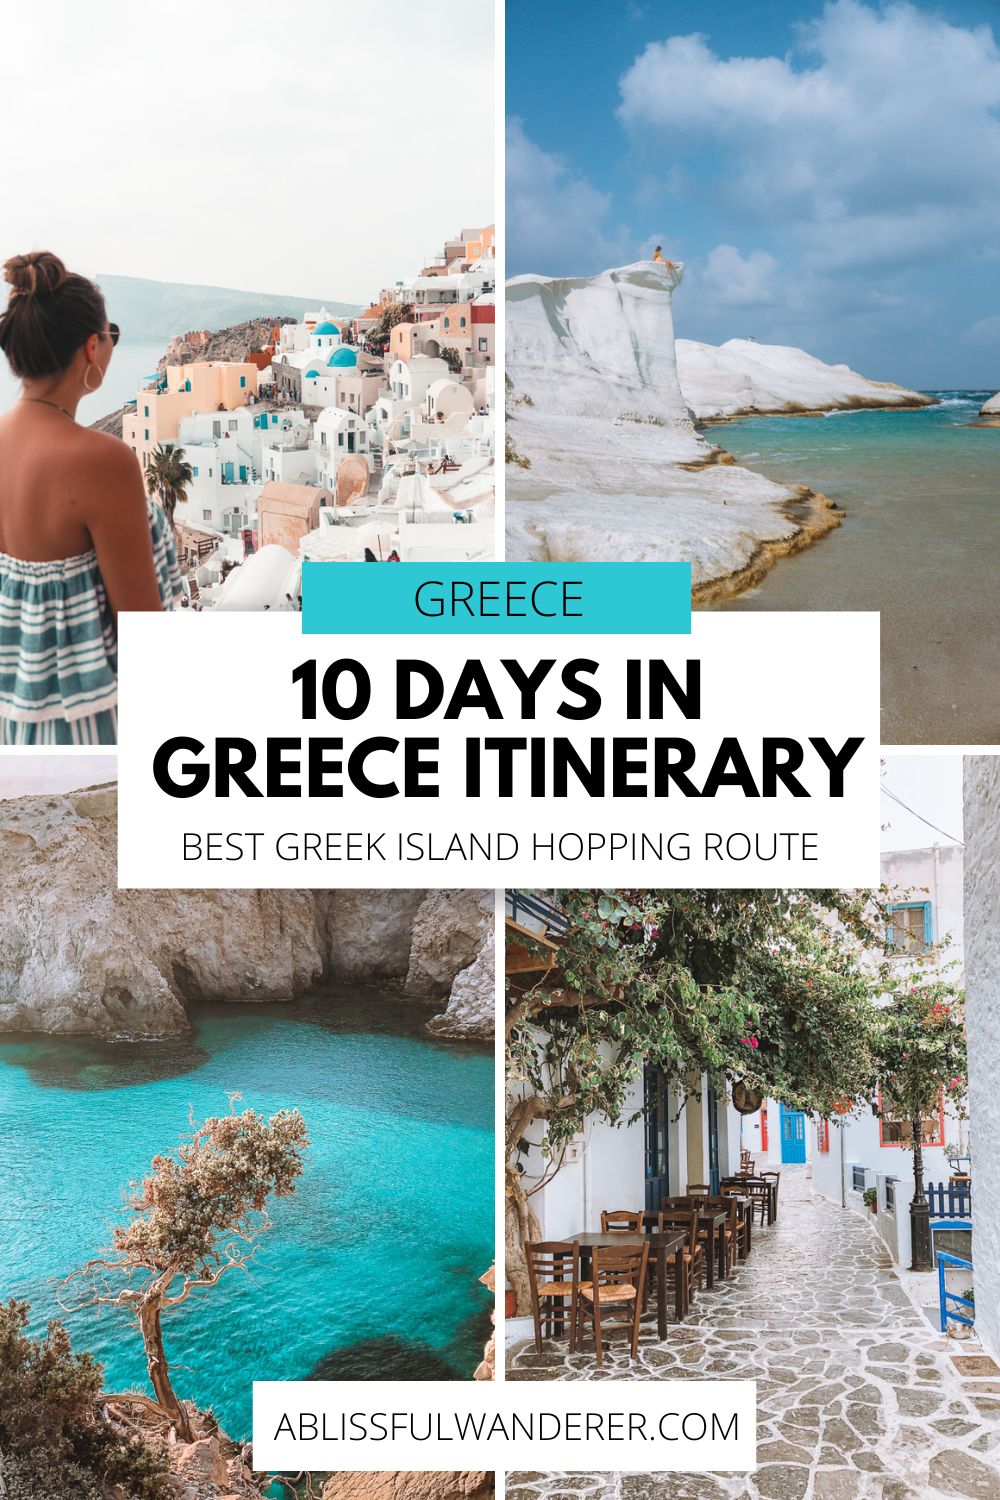 Greece itinerary 10 days - how to plan your dream Greece vacation